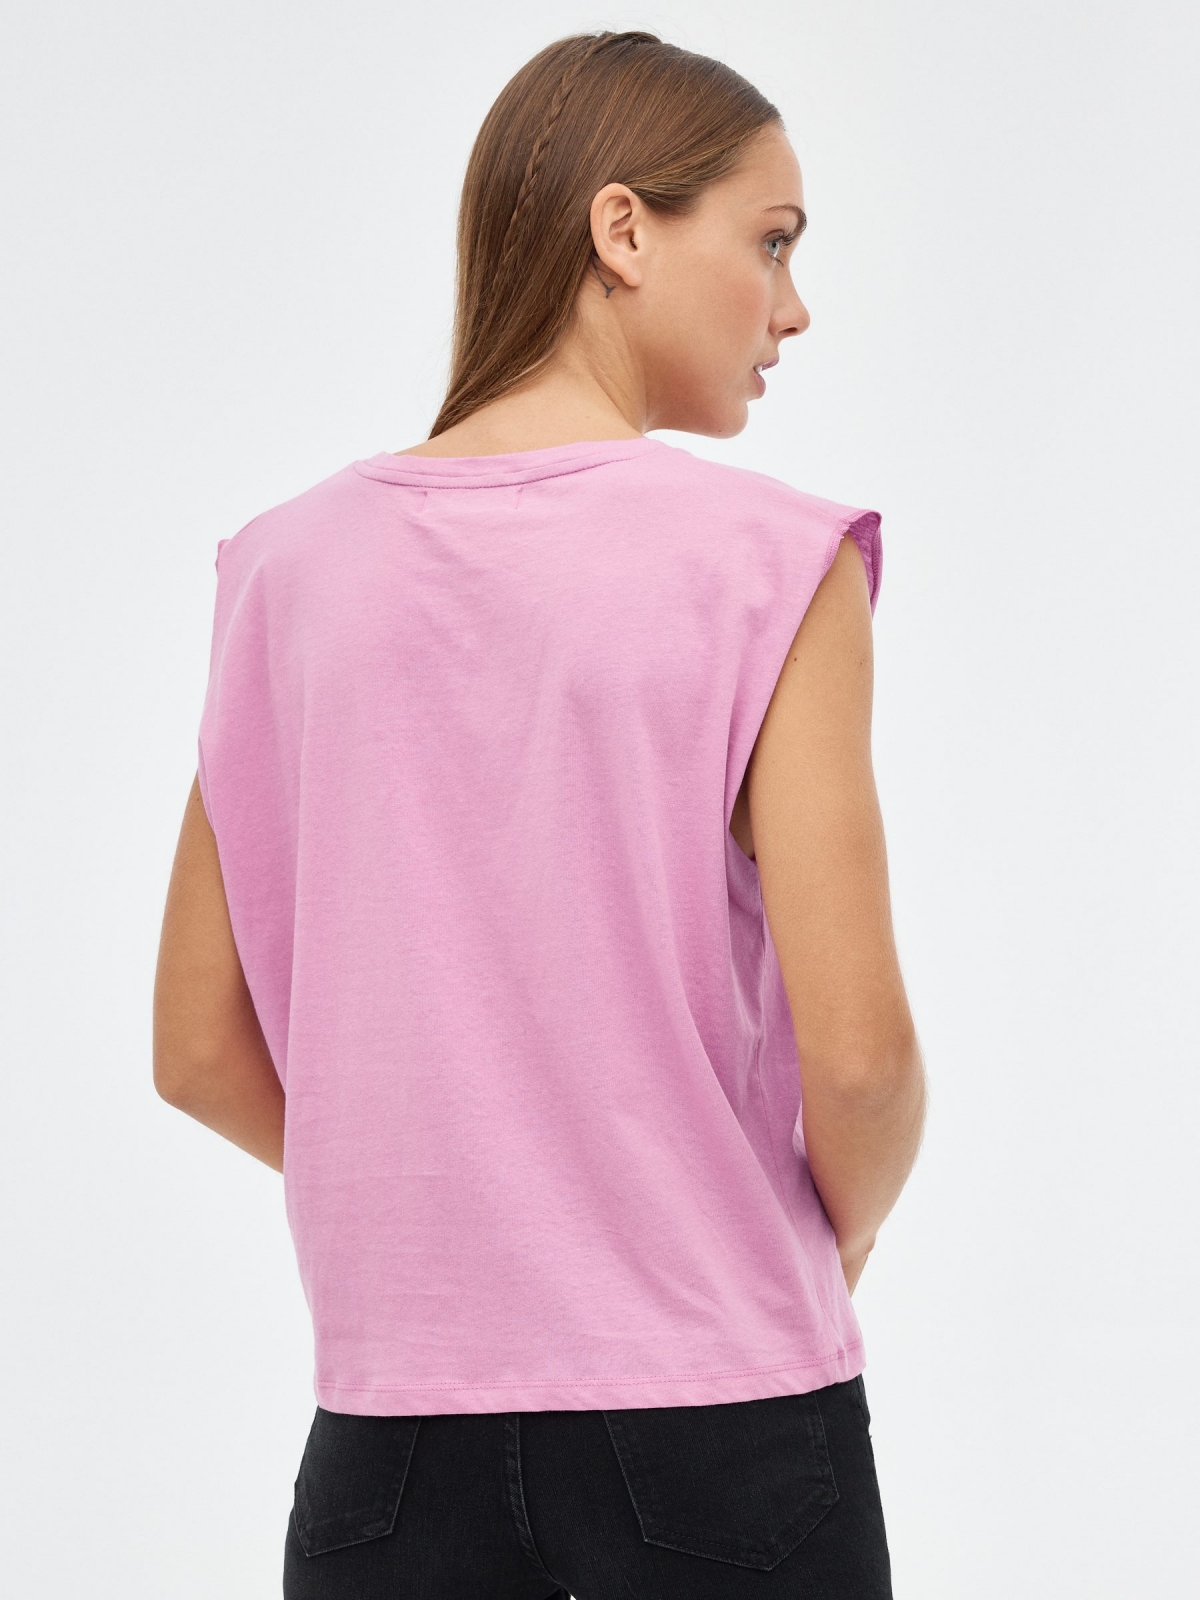 Sleeveless tiger t-shirt magenta middle back view